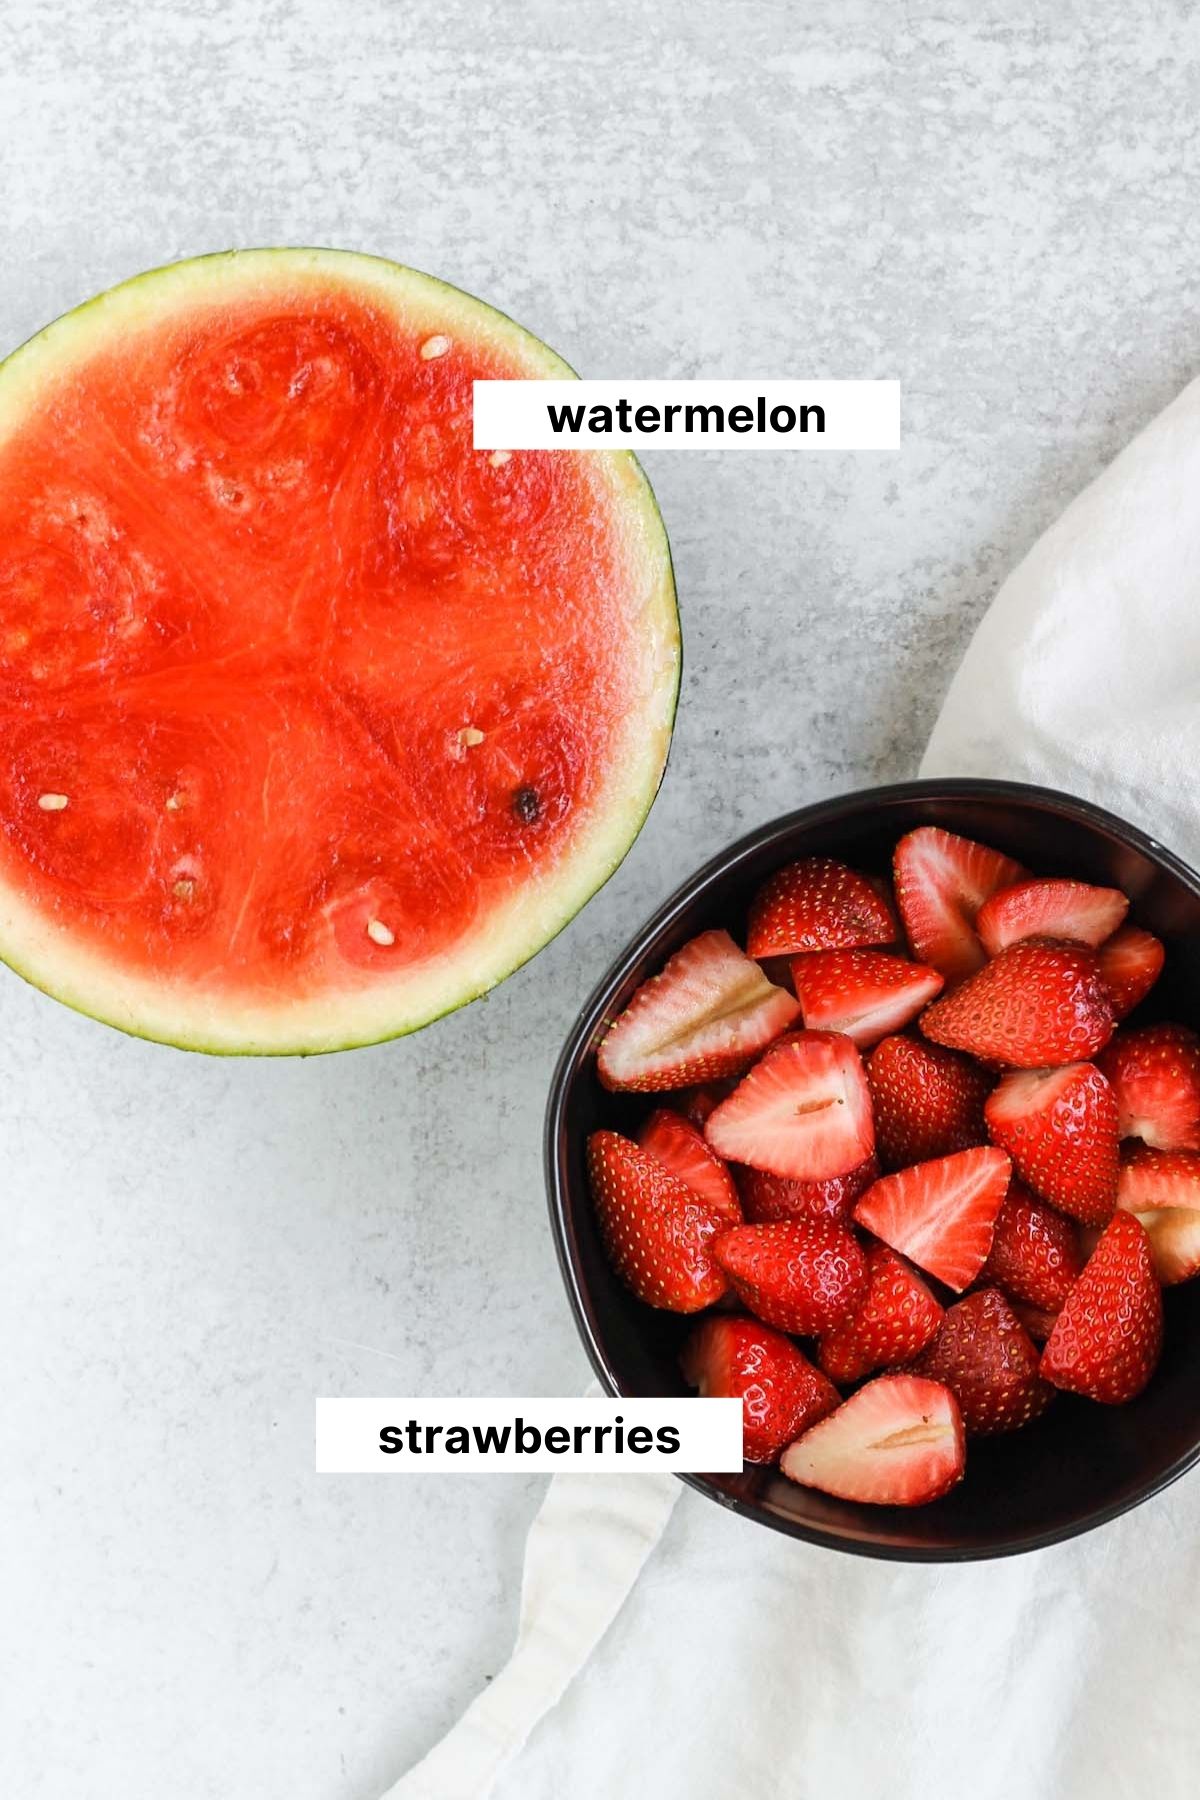 labeled ingredients for strawberry watermelon popsicles